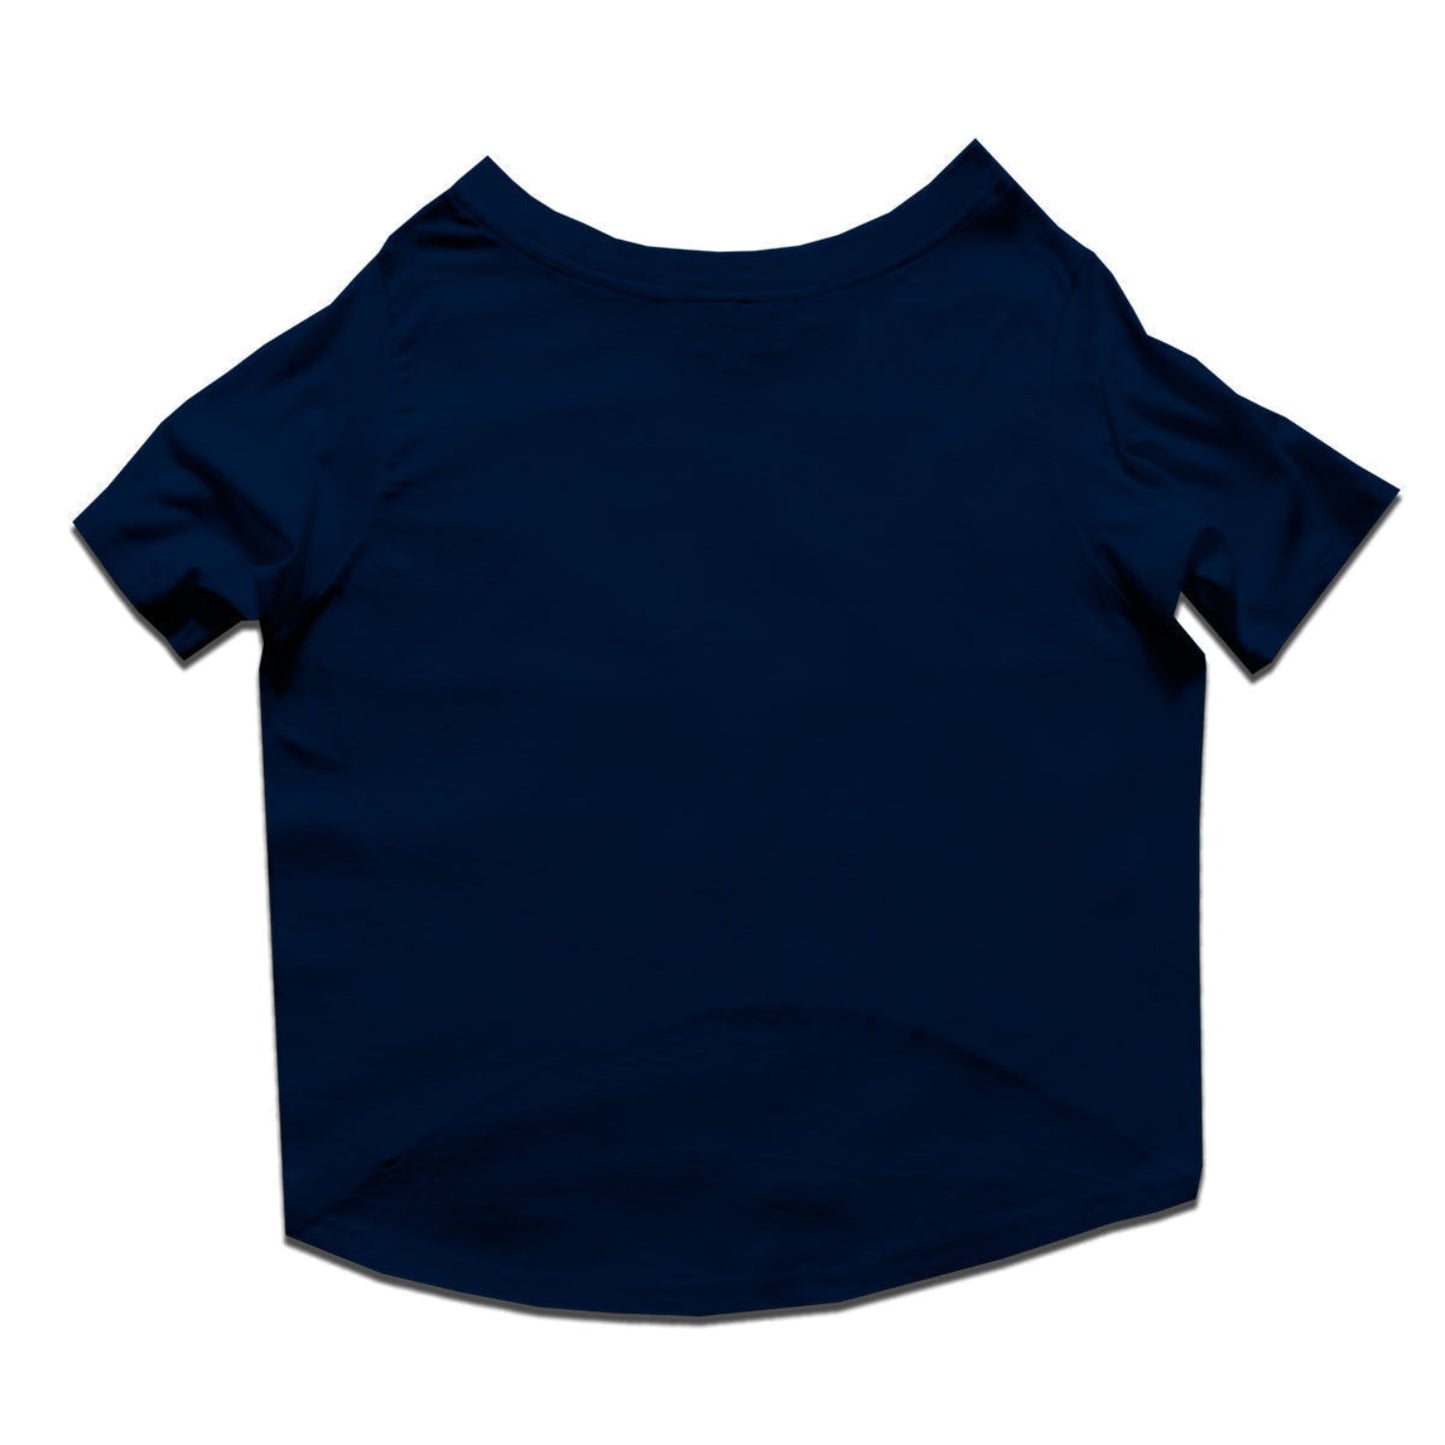 Ruse  / Navy Ruse Basic Crew Neck "I'm Too Old for this Sh*t" Printed Half Sleeves Dog Tee20